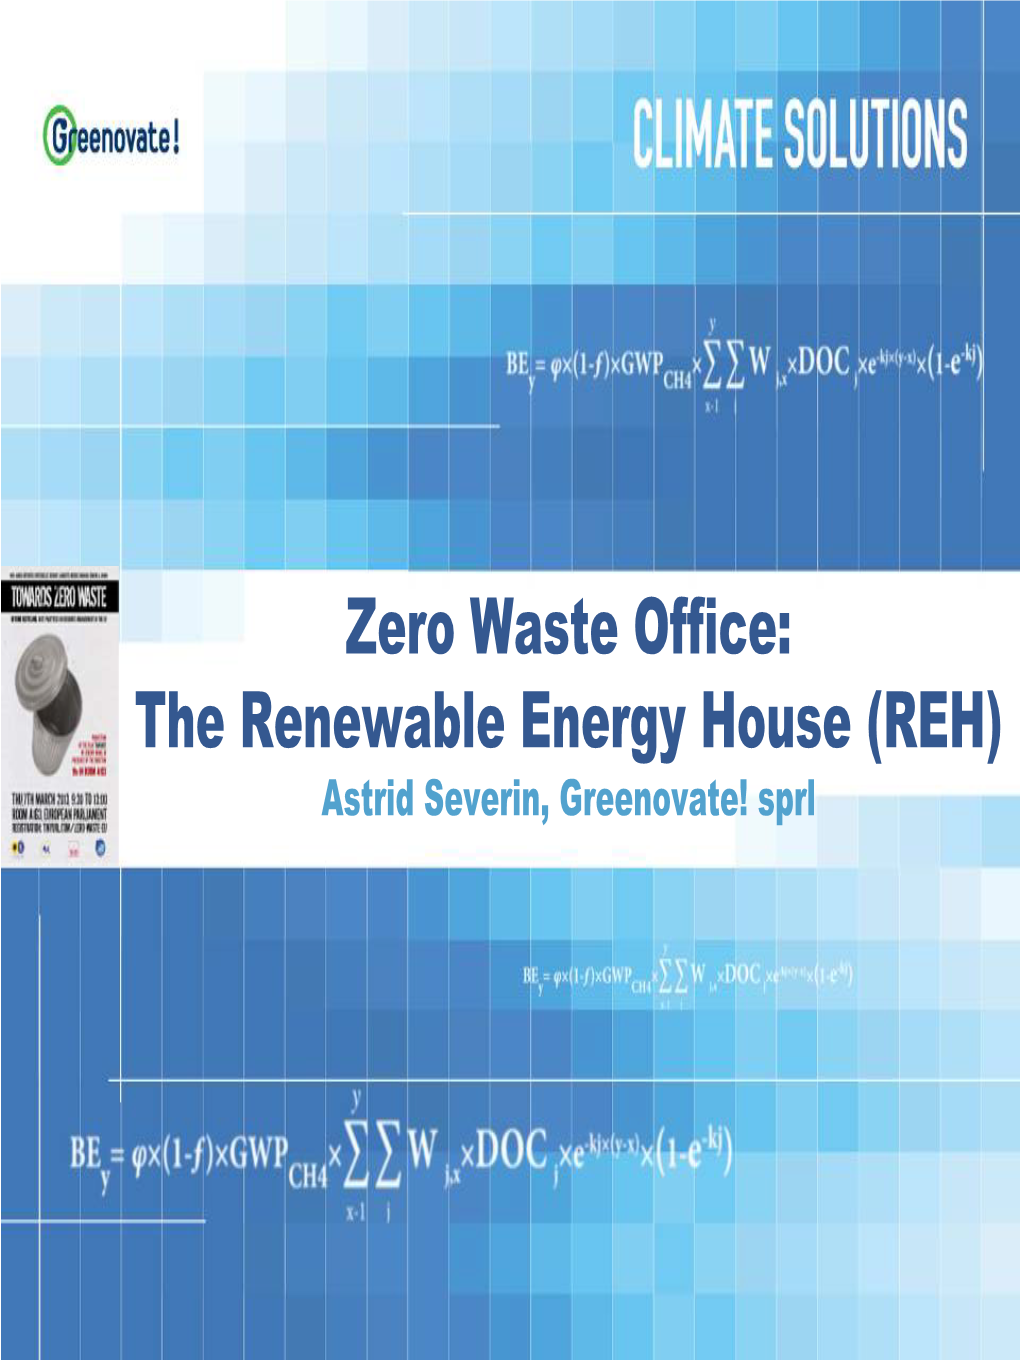 Zero Waste Office: the Renewable Energy House (REH) Astrid Severin, Greenovate! Sprl the Renewable Energy House in Brussels: Some Figures